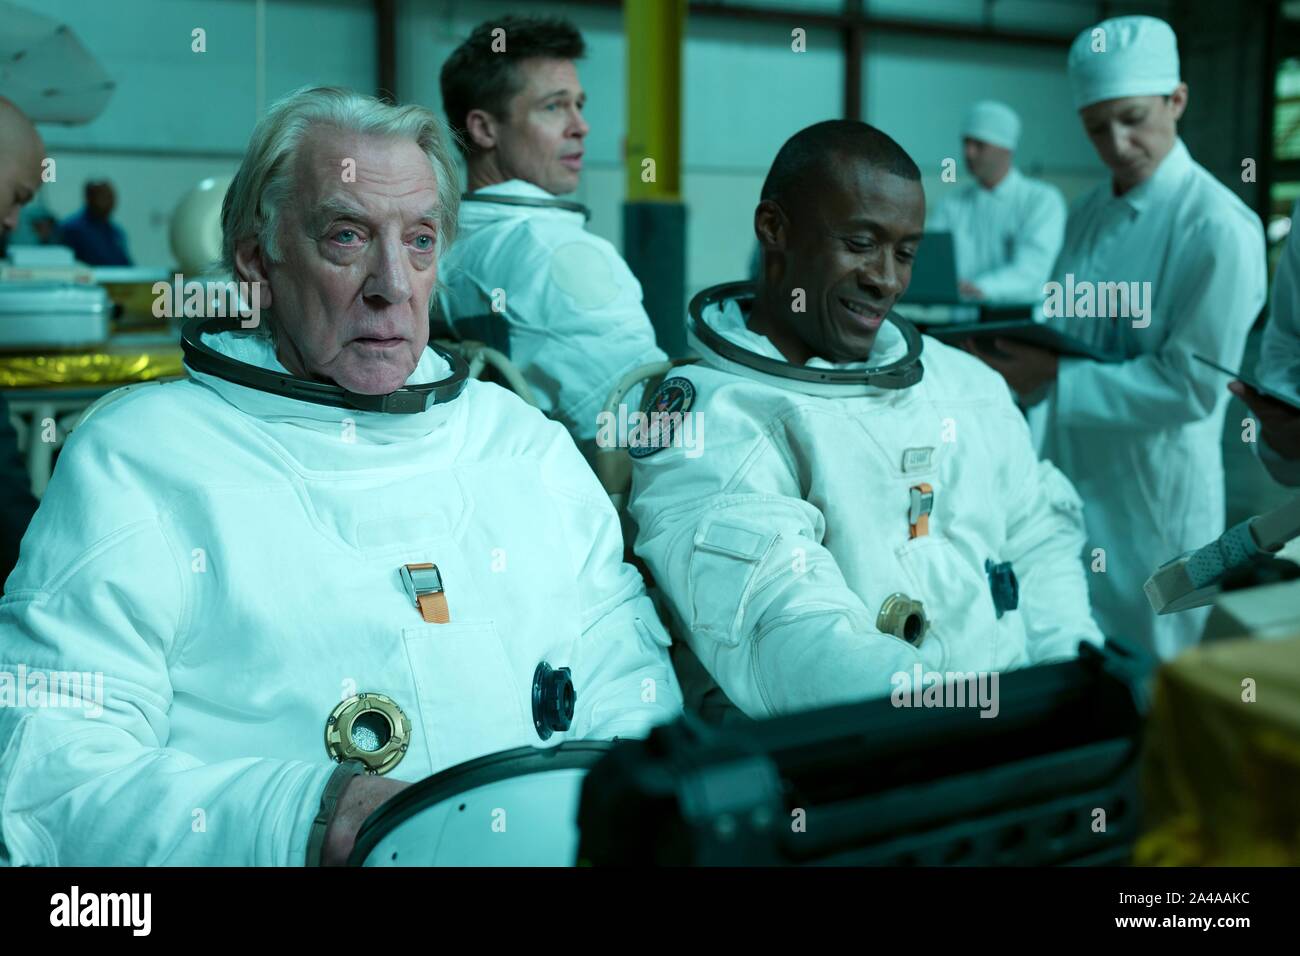 DONALD SUTHERLAND , BRAD PITT and SEAN BLAKEMORE in AD ASTRA (2019), directed by JAMES GRAY. Credit: NEW REGENCY PICTURES / Album Stock Photo